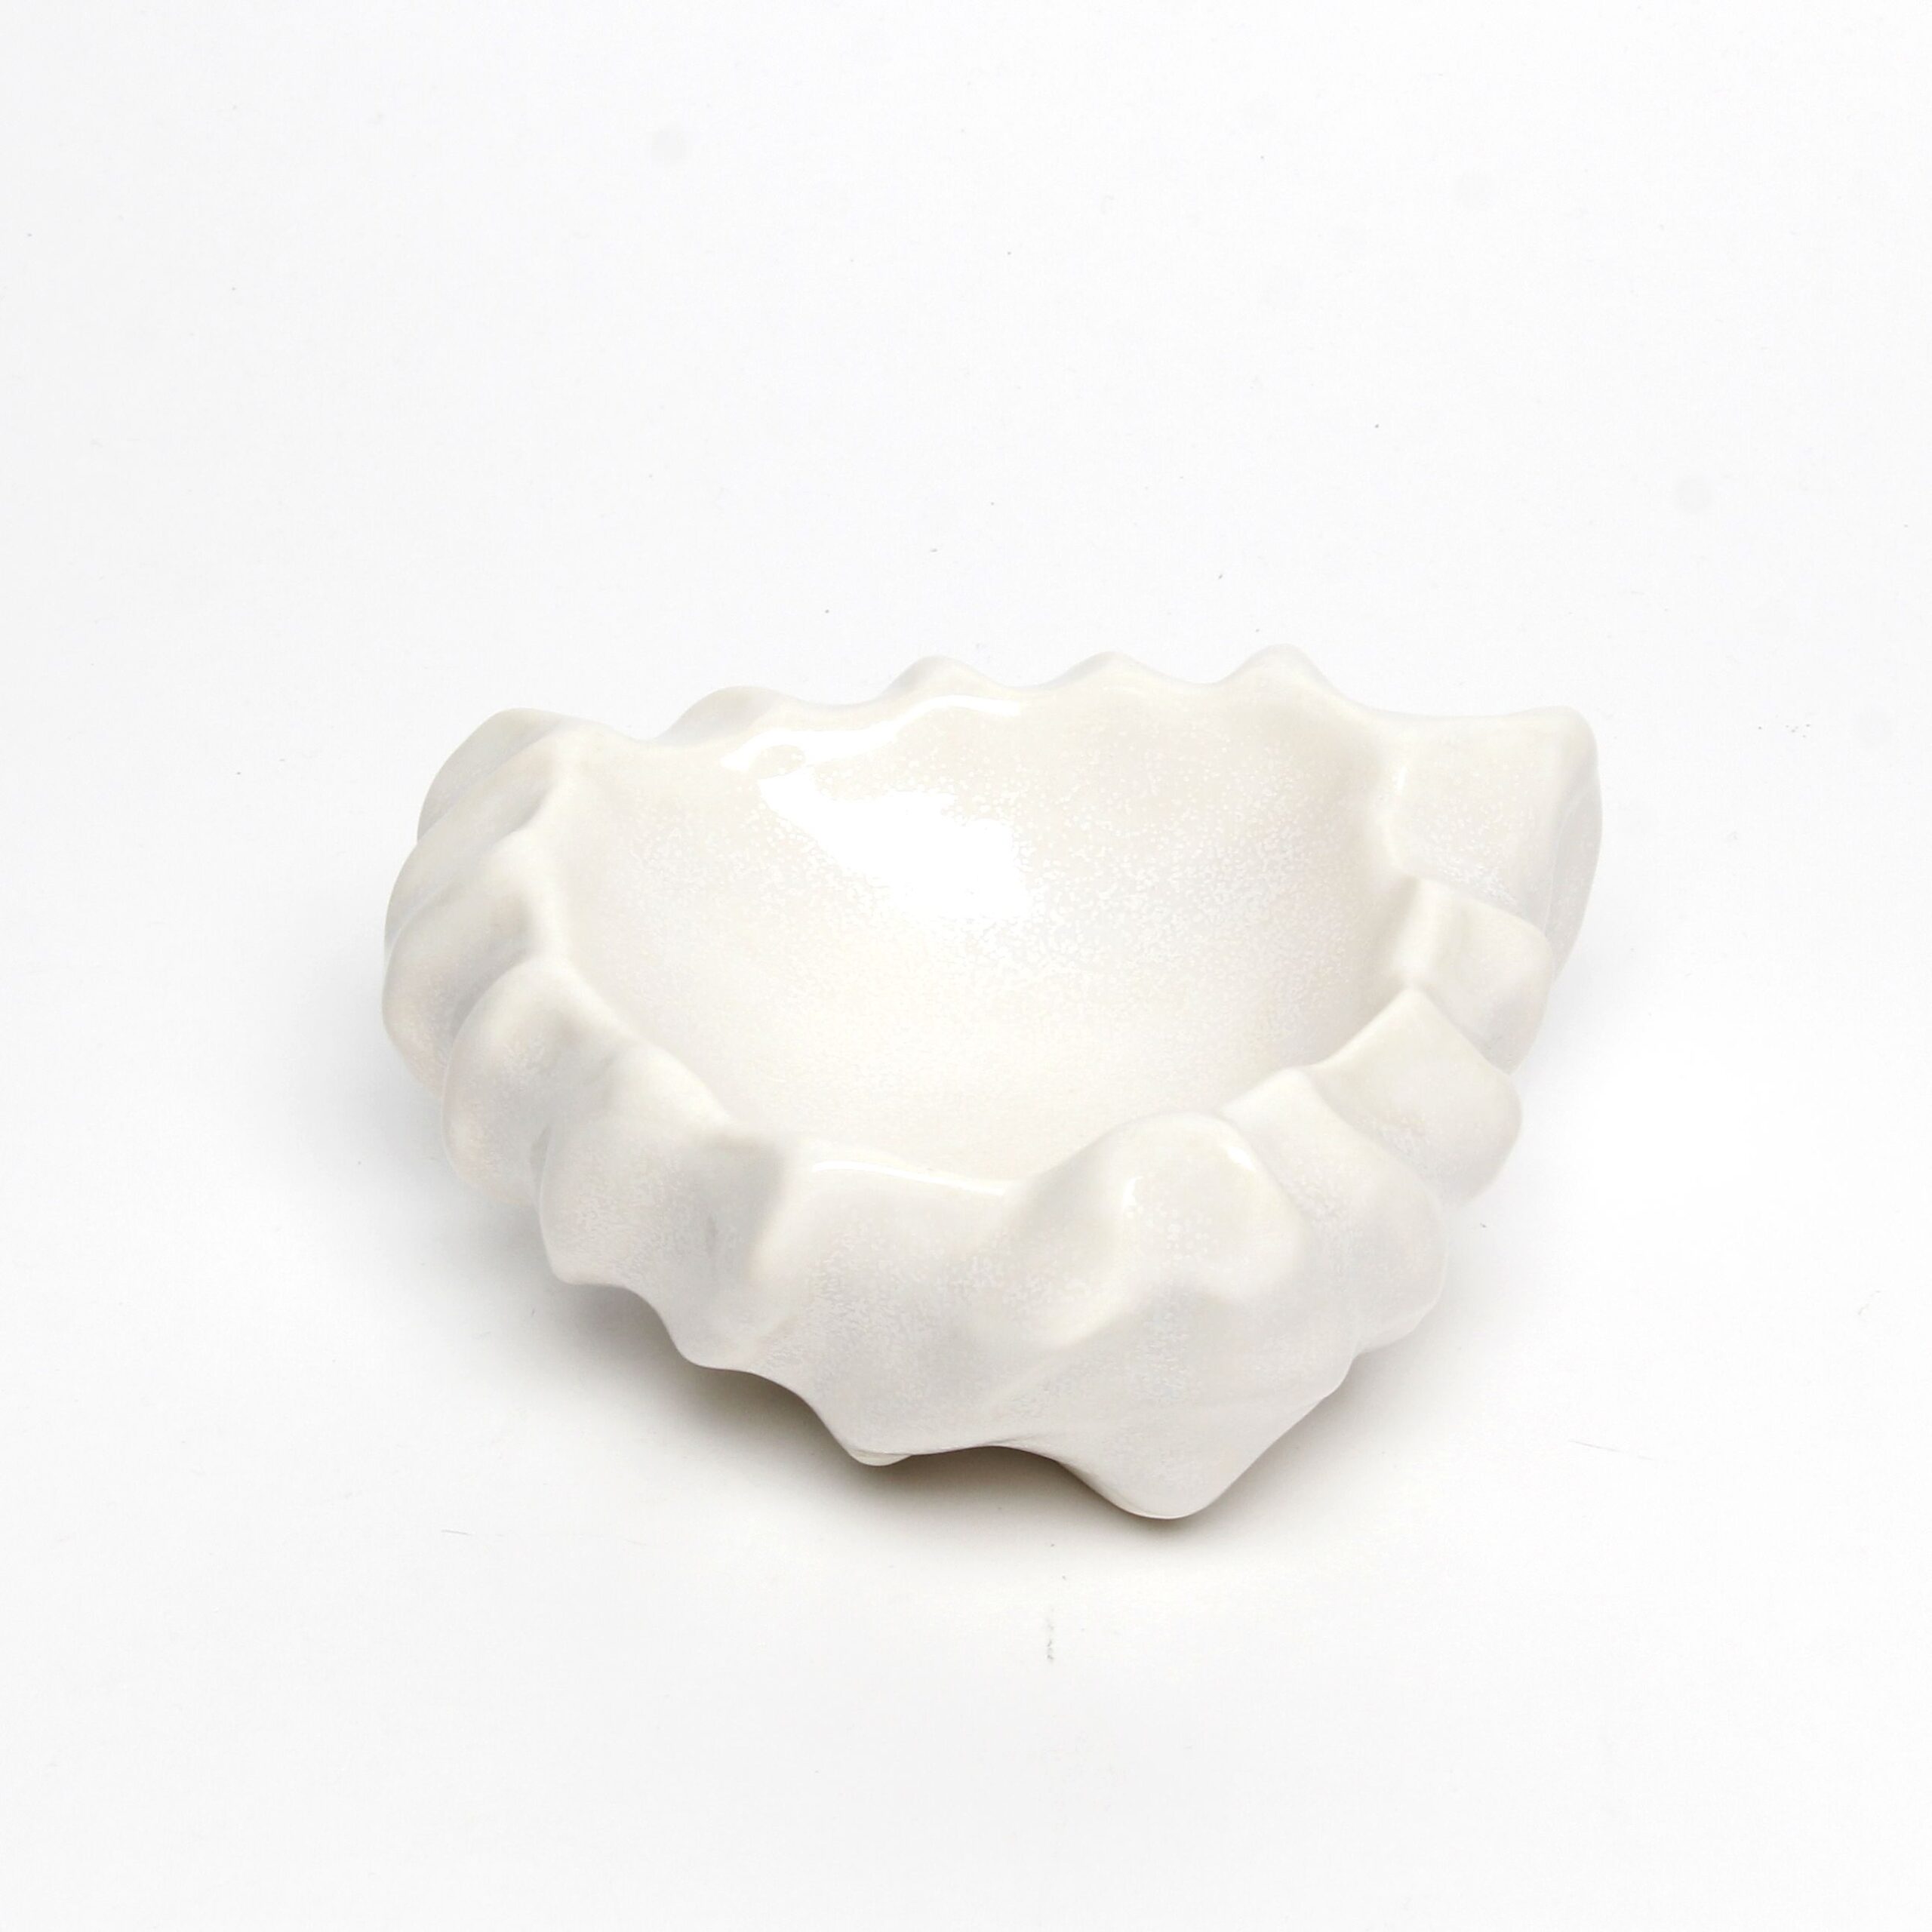 William Lee: Triangle Bowl in White Product Image 2 of 3